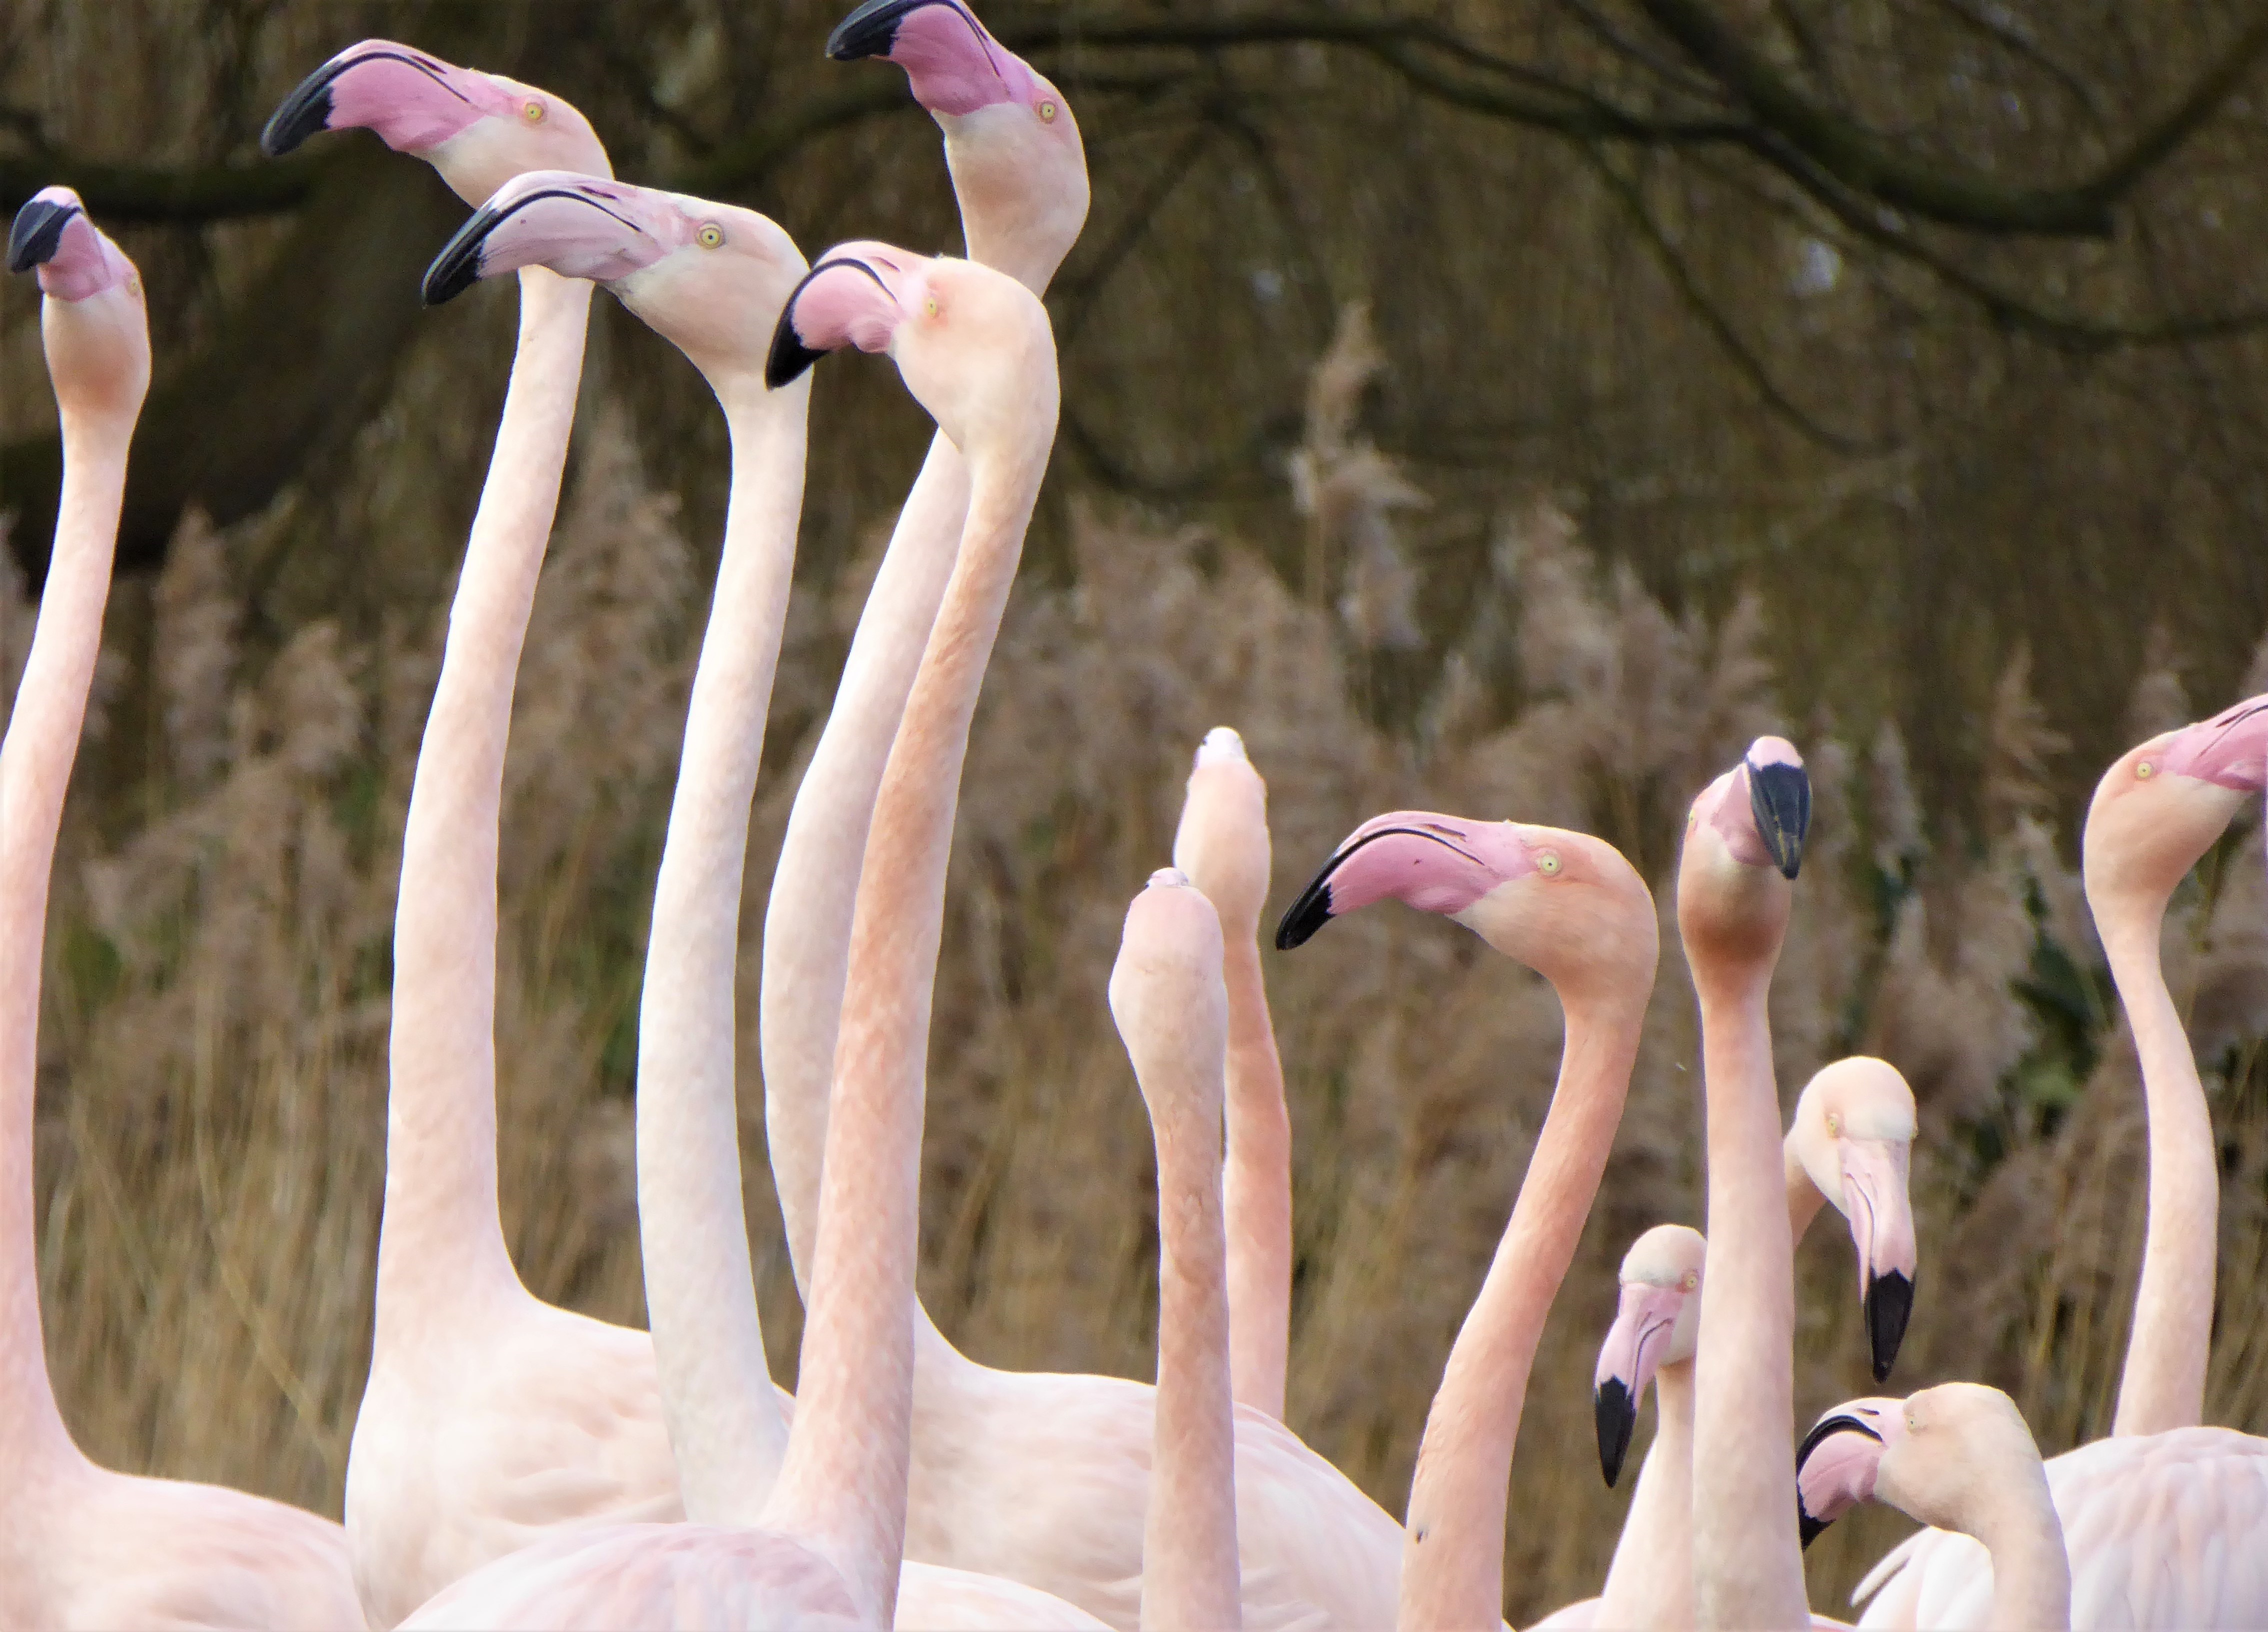 Closed but still caring on International Flamingo Day